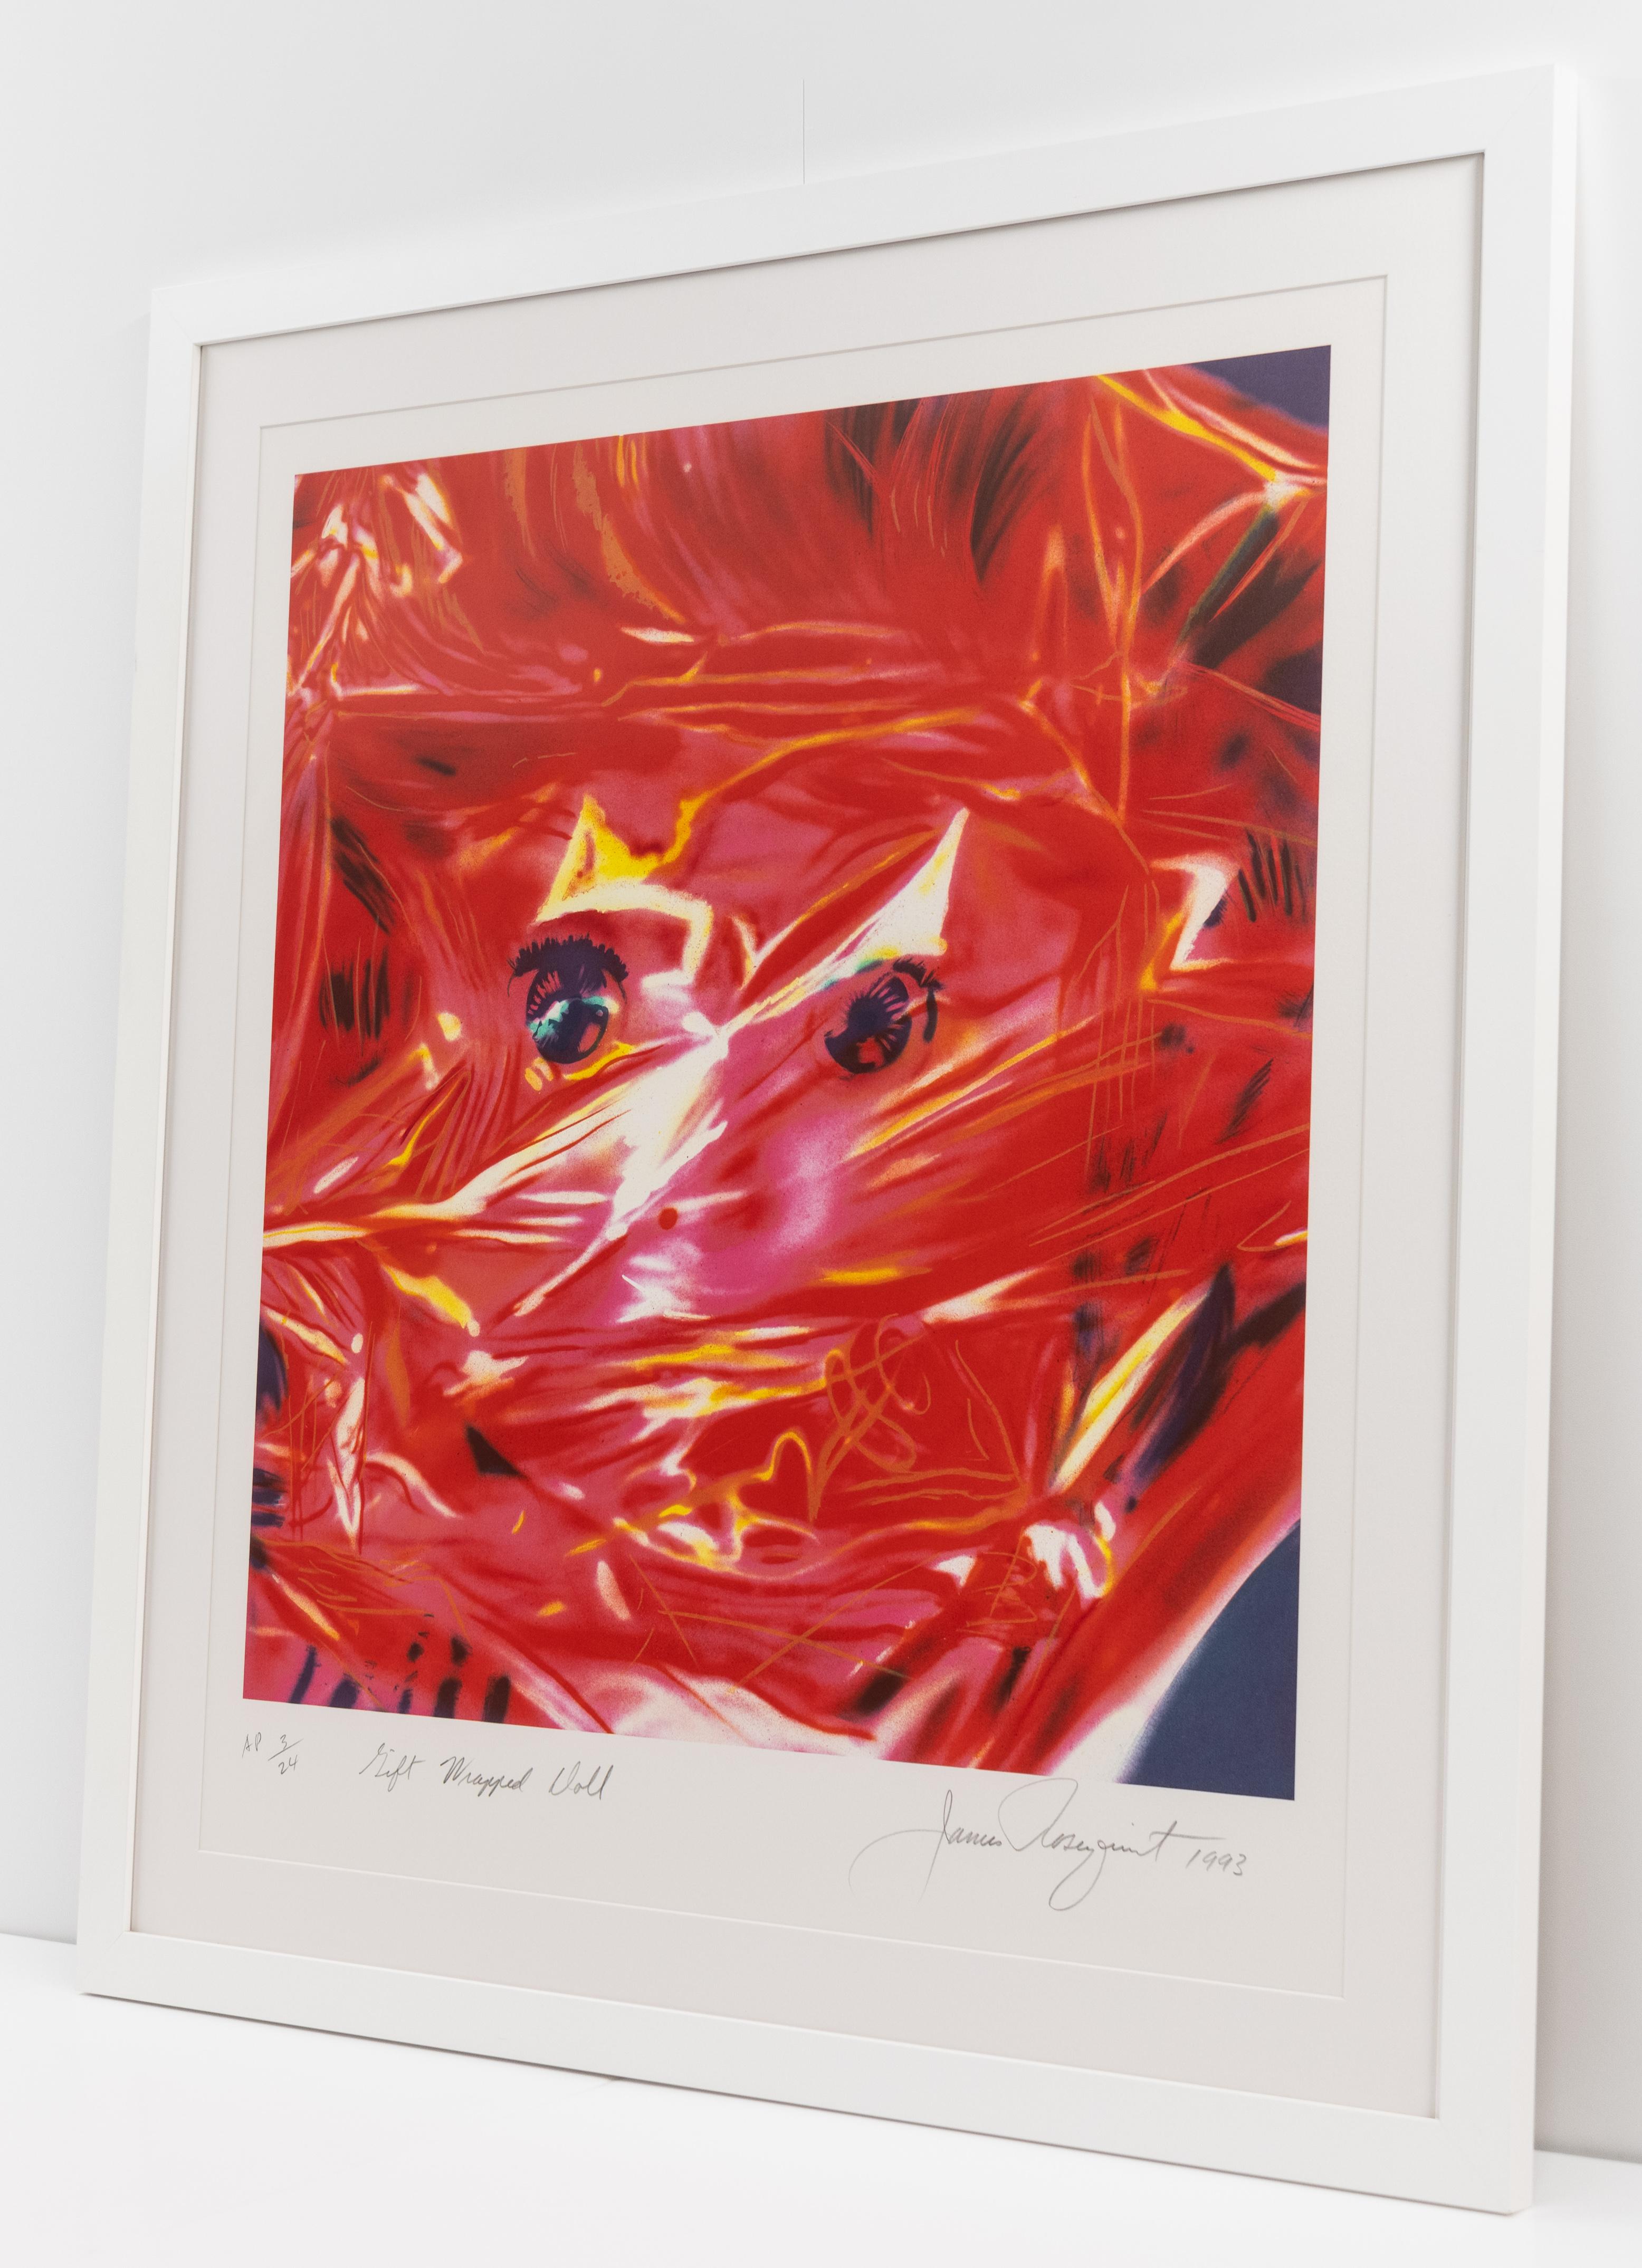 This is a color lithograph of a gift wrapped doll by James Rosenquist.

The artwork measures 23.75 x 23.75 inches and is offered by CLAMP in New York City.